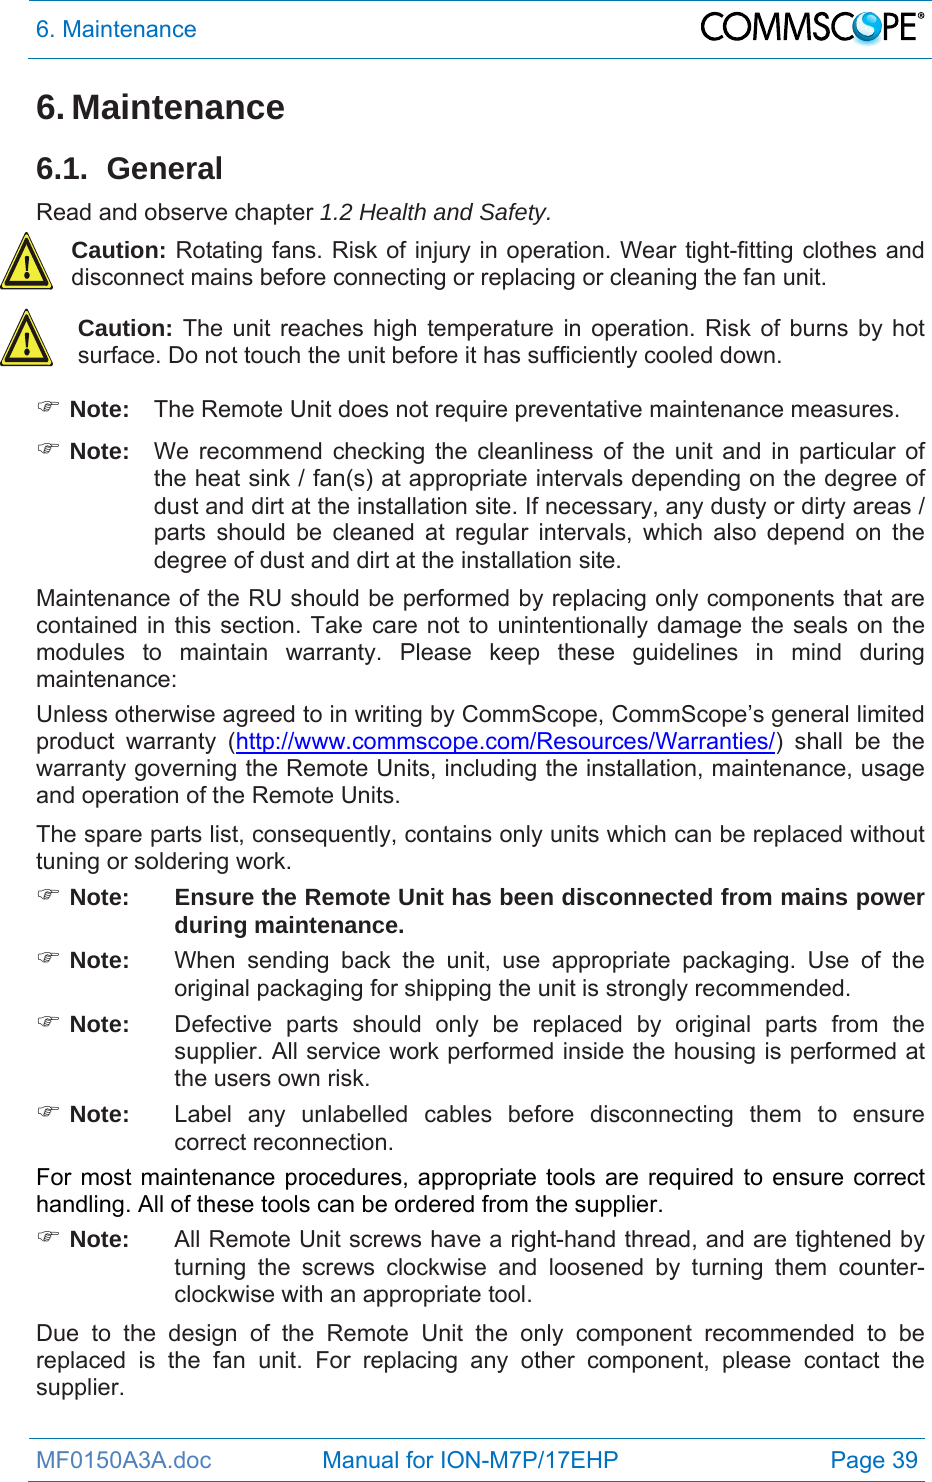 6. Maintenance  MF0150A3A.doc                 Manual for ION-M7P/17EHP  Page 39 6. Maintenance 6.1. General Read and observe chapter 1.2 Health and Safety. Caution: Rotating fans. Risk of injury in operation. Wear tight-fitting clothes and disconnect mains before connecting or replacing or cleaning the fan unit. Caution: The unit reaches high temperature in operation. Risk of burns by hot surface. Do not touch the unit before it has sufficiently cooled down.  Note:  The Remote Unit does not require preventative maintenance measures.  Note:  We recommend checking the cleanliness of the unit and in particular of the heat sink / fan(s) at appropriate intervals depending on the degree of dust and dirt at the installation site. If necessary, any dusty or dirty areas / parts should be cleaned at regular intervals, which also depend on the degree of dust and dirt at the installation site. Maintenance of the RU should be performed by replacing only components that are contained in this section. Take care not to unintentionally damage the seals on the modules to maintain warranty. Please keep these guidelines in mind during maintenance: Unless otherwise agreed to in writing by CommScope, CommScope’s general limited product warranty (http://www.commscope.com/Resources/Warranties/) shall be the warranty governing the Remote Units, including the installation, maintenance, usage and operation of the Remote Units. The spare parts list, consequently, contains only units which can be replaced without tuning or soldering work.  Note:  Ensure the Remote Unit has been disconnected from mains power during maintenance.  Note:  When sending back the unit, use appropriate packaging. Use of the original packaging for shipping the unit is strongly recommended.  Note:  Defective parts should only be replaced by original parts from the supplier. All service work performed inside the housing is performed at the users own risk.  Note:  Label any unlabelled cables before disconnecting them to ensure correct reconnection. For most maintenance procedures, appropriate tools are required to ensure correct handling. All of these tools can be ordered from the supplier.   Note:   All Remote Unit screws have a right-hand thread, and are tightened by turning the screws clockwise and loosened by turning them counter-clockwise with an appropriate tool. Due to the design of the Remote Unit the only component recommended to be replaced is the fan unit. For replacing any other component, please contact the supplier. 